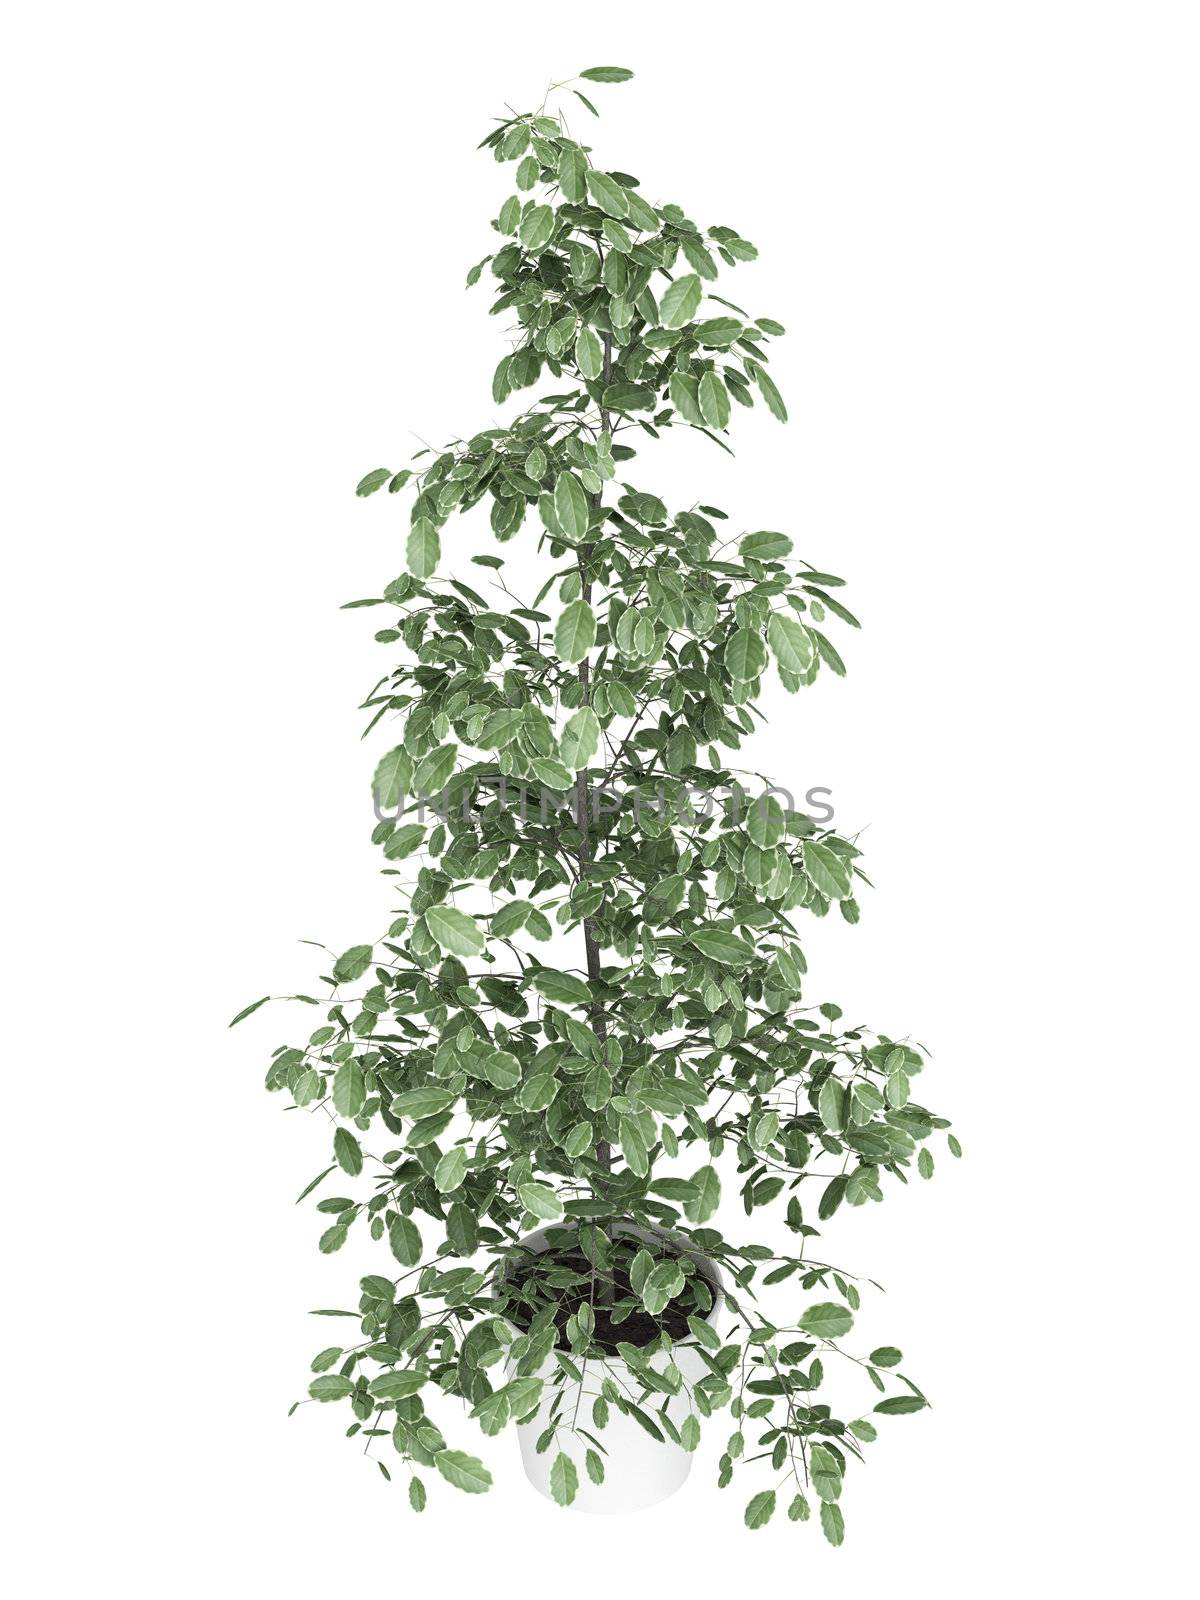 Tall ficus, or fig, growing in a white container as an ornamental houseplant isolated on white